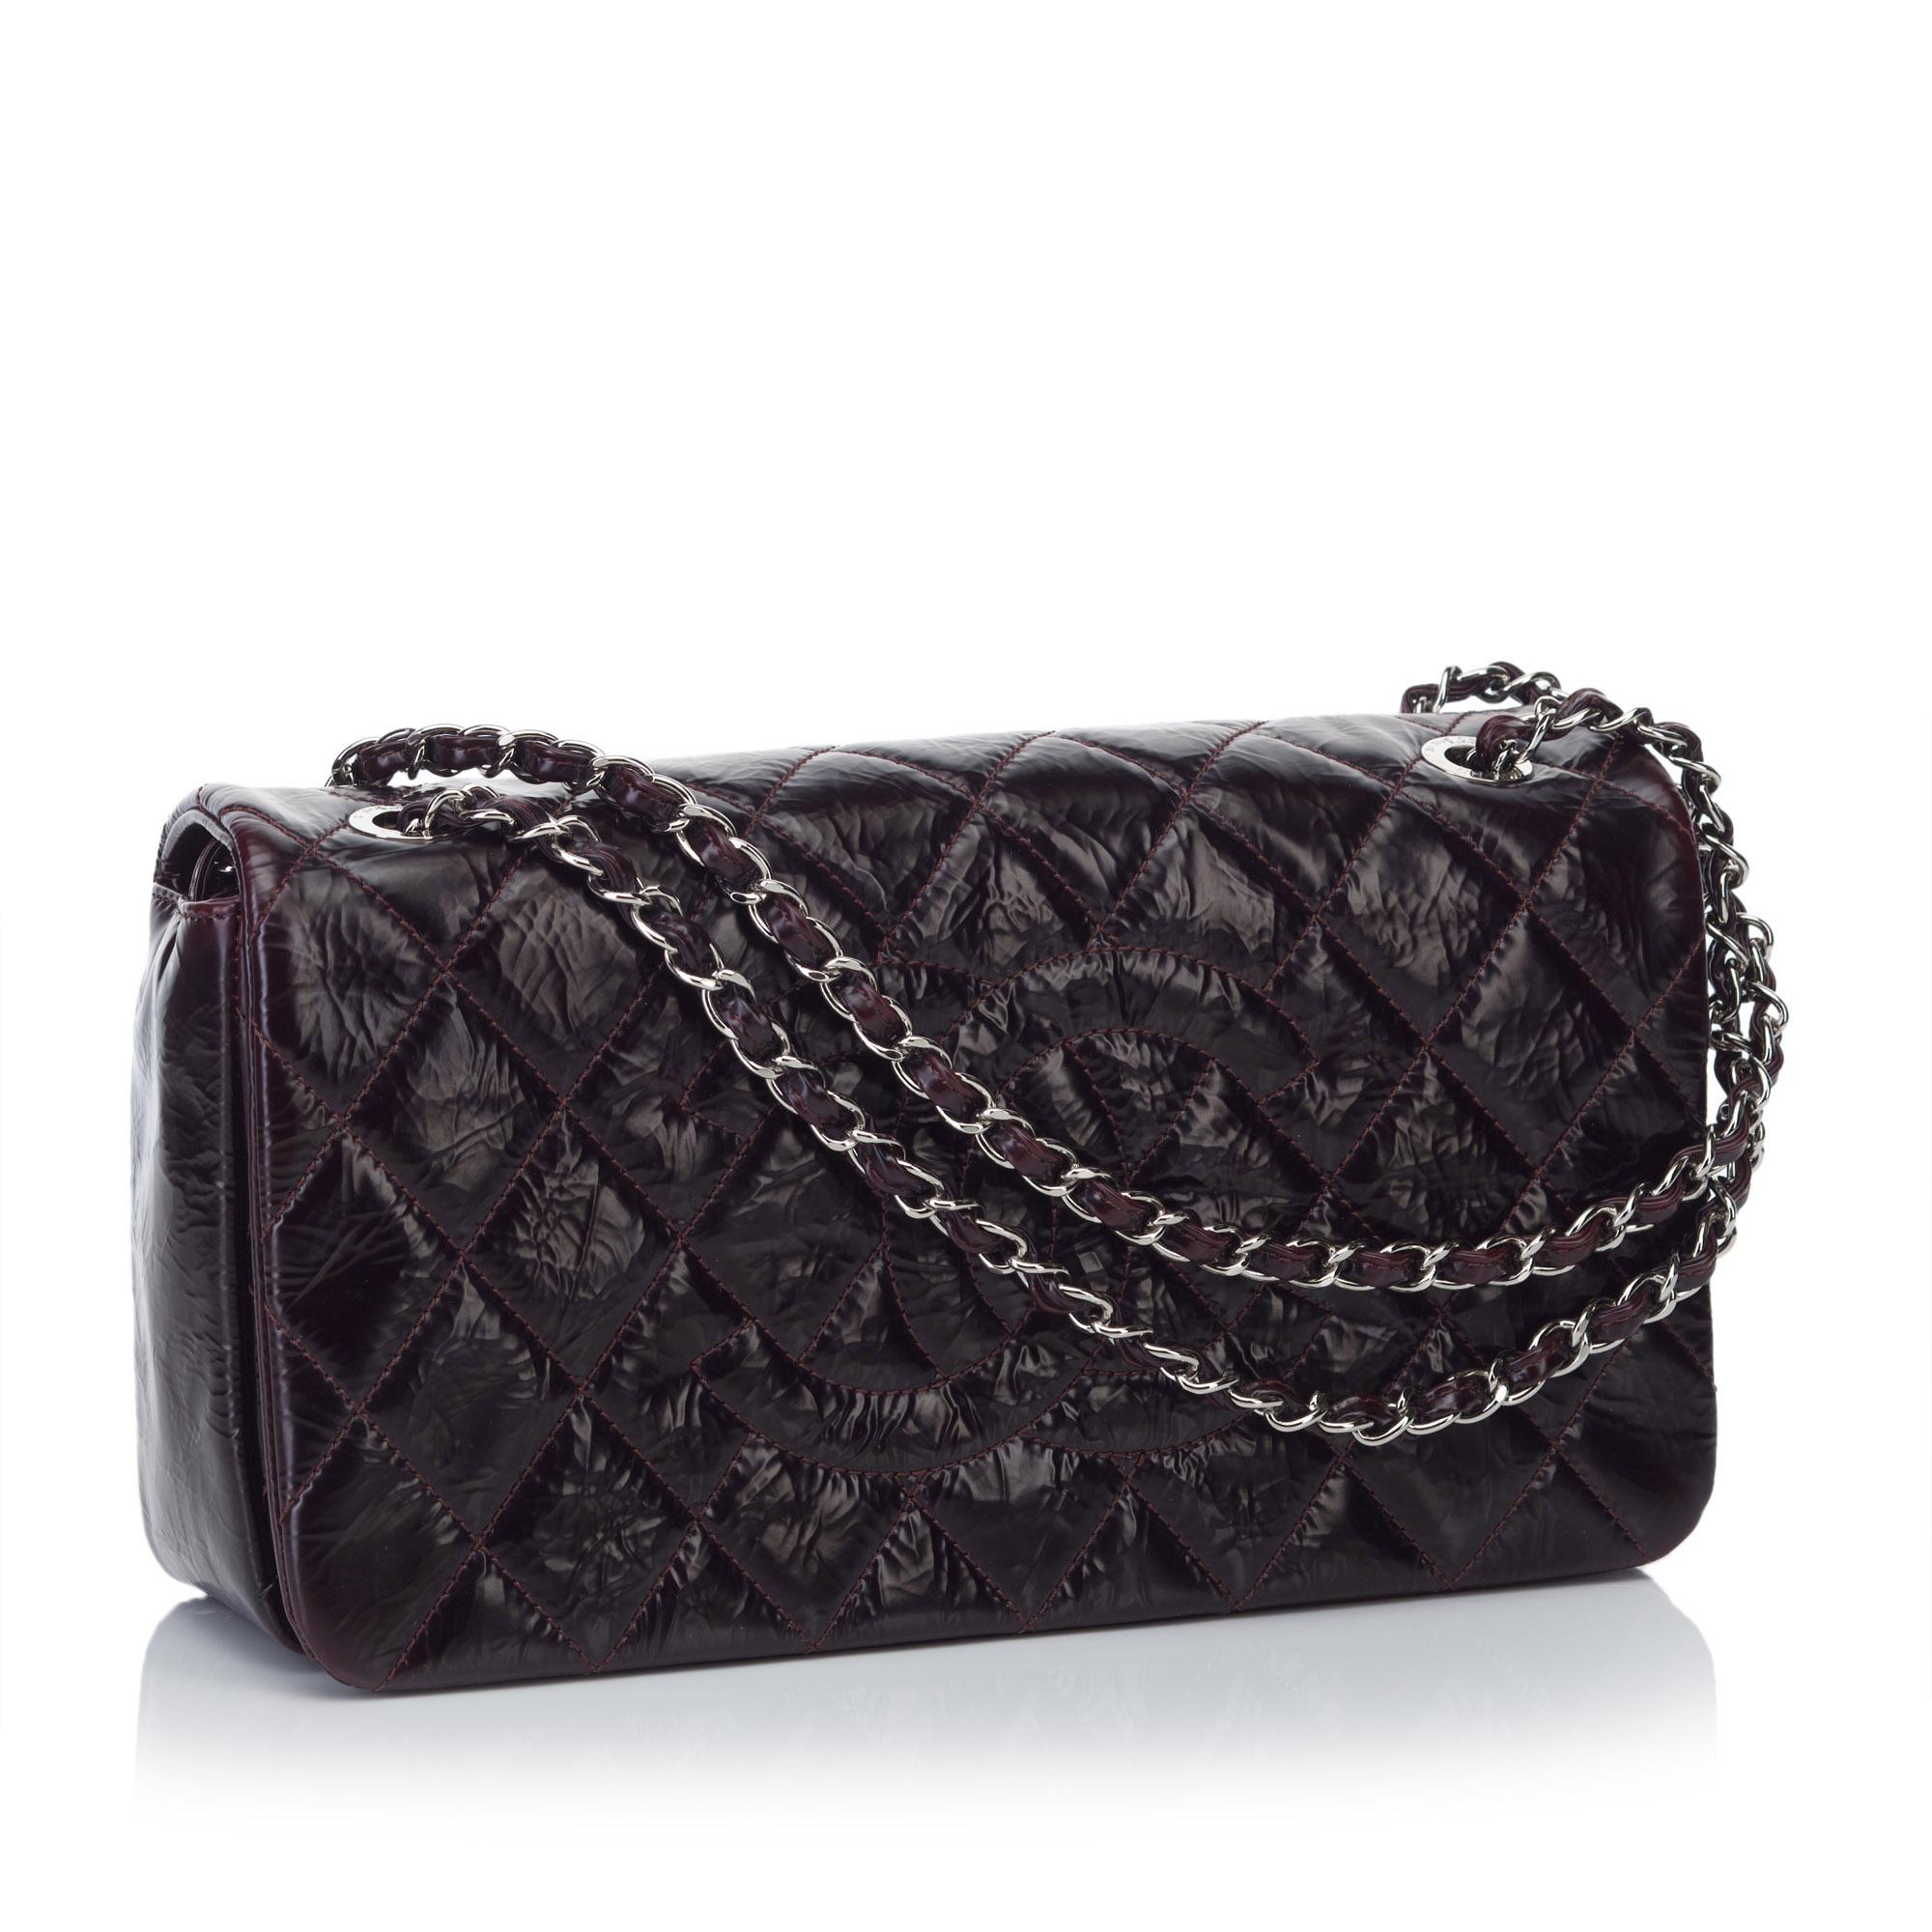 Chanel Matelasse Patent Leather Shoulder Bag in Red - Lyst